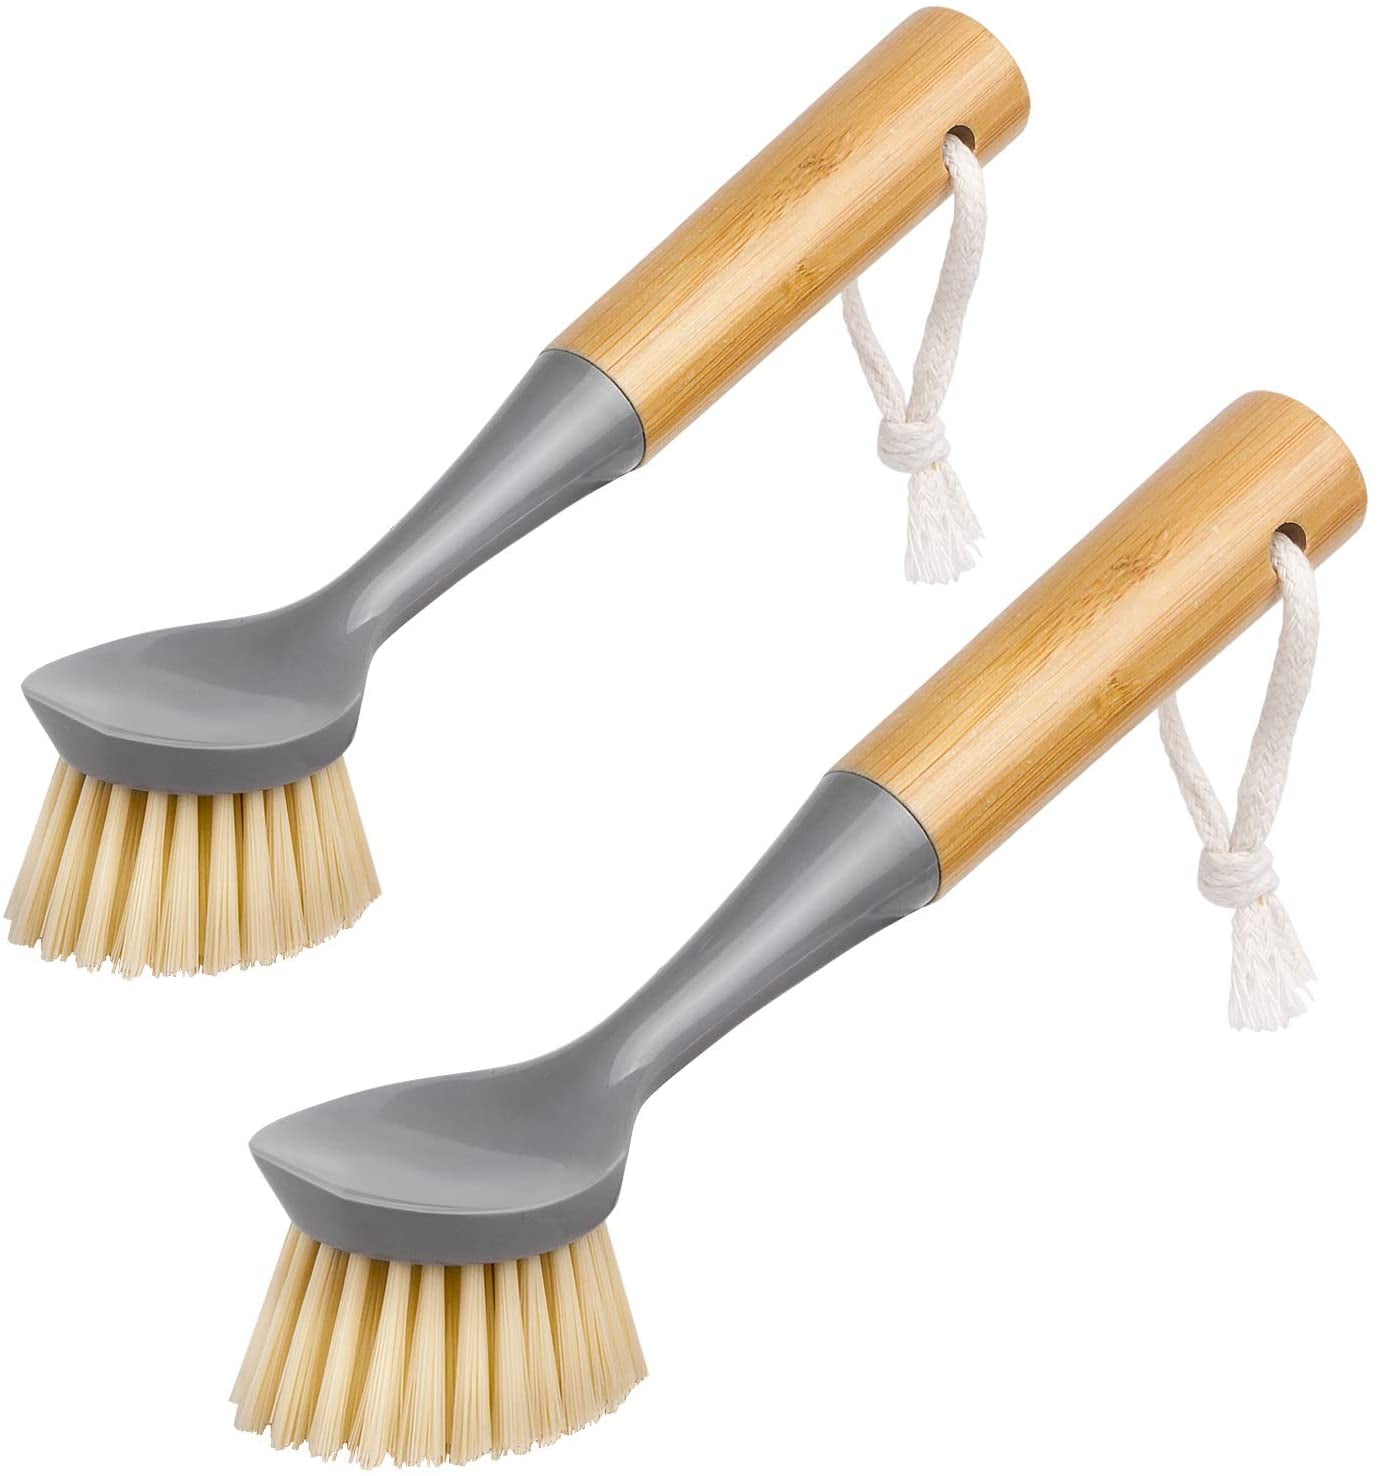 Pack of 2 Dish Brush with Bamboo Handle Household Cleaning Brushes Built-in  Scraper, Scrub Brush for Pans, Pots, Kitchen Sink Cleaning 